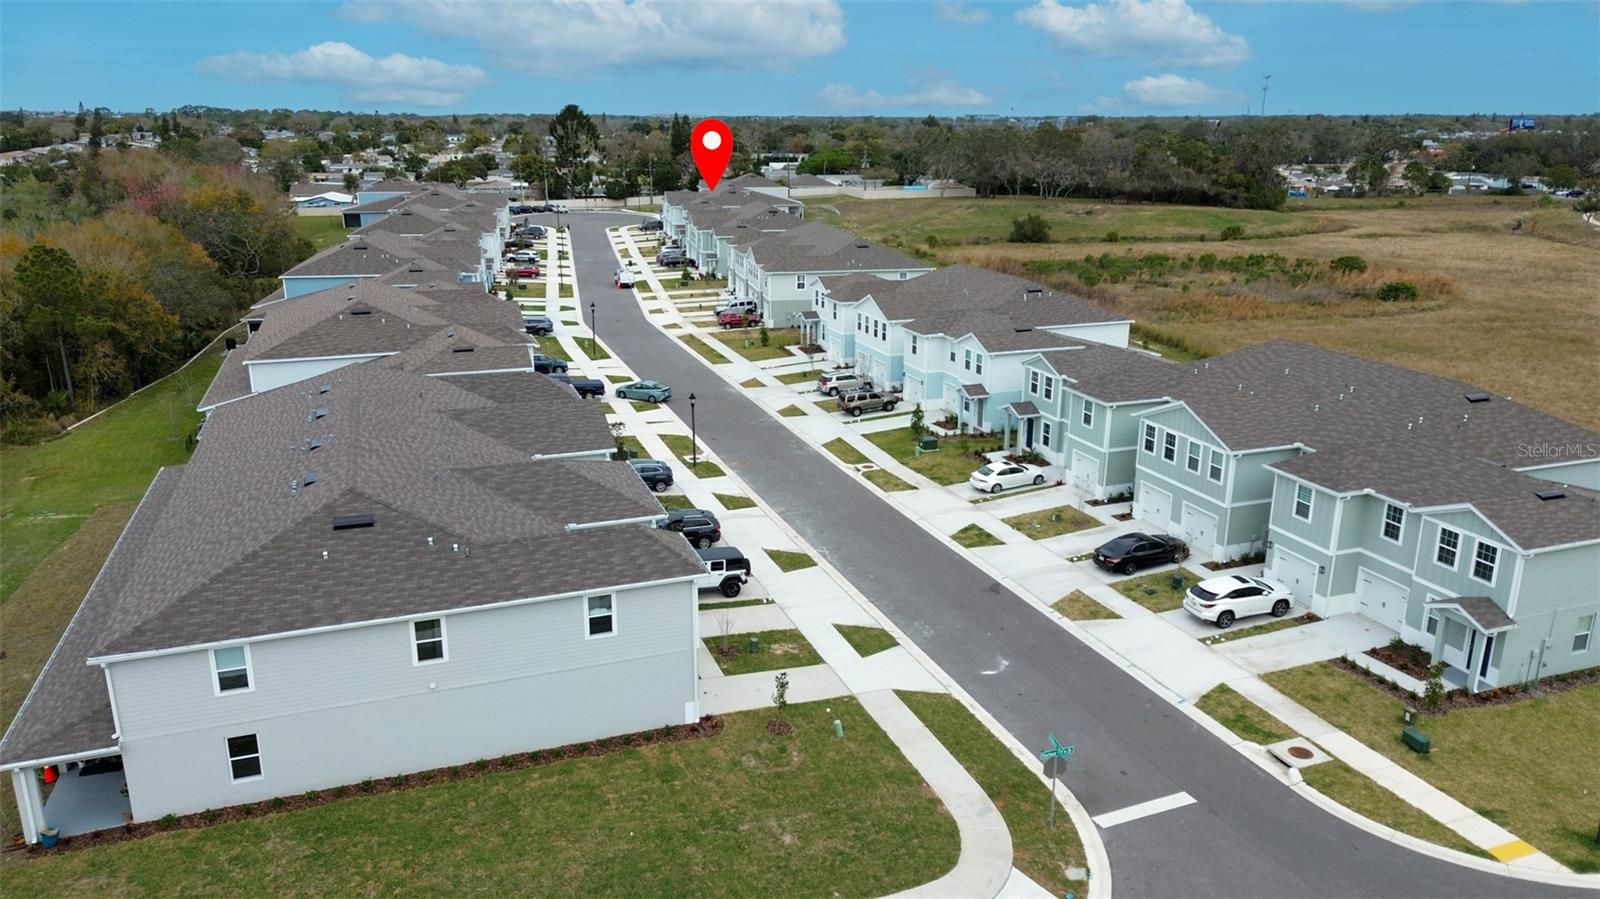 While the Anclote Square development is located just off of US Hwy 19, behind Sun Toyota, the green space offers a generous buffer between the hustle and bustle of traffic noise.